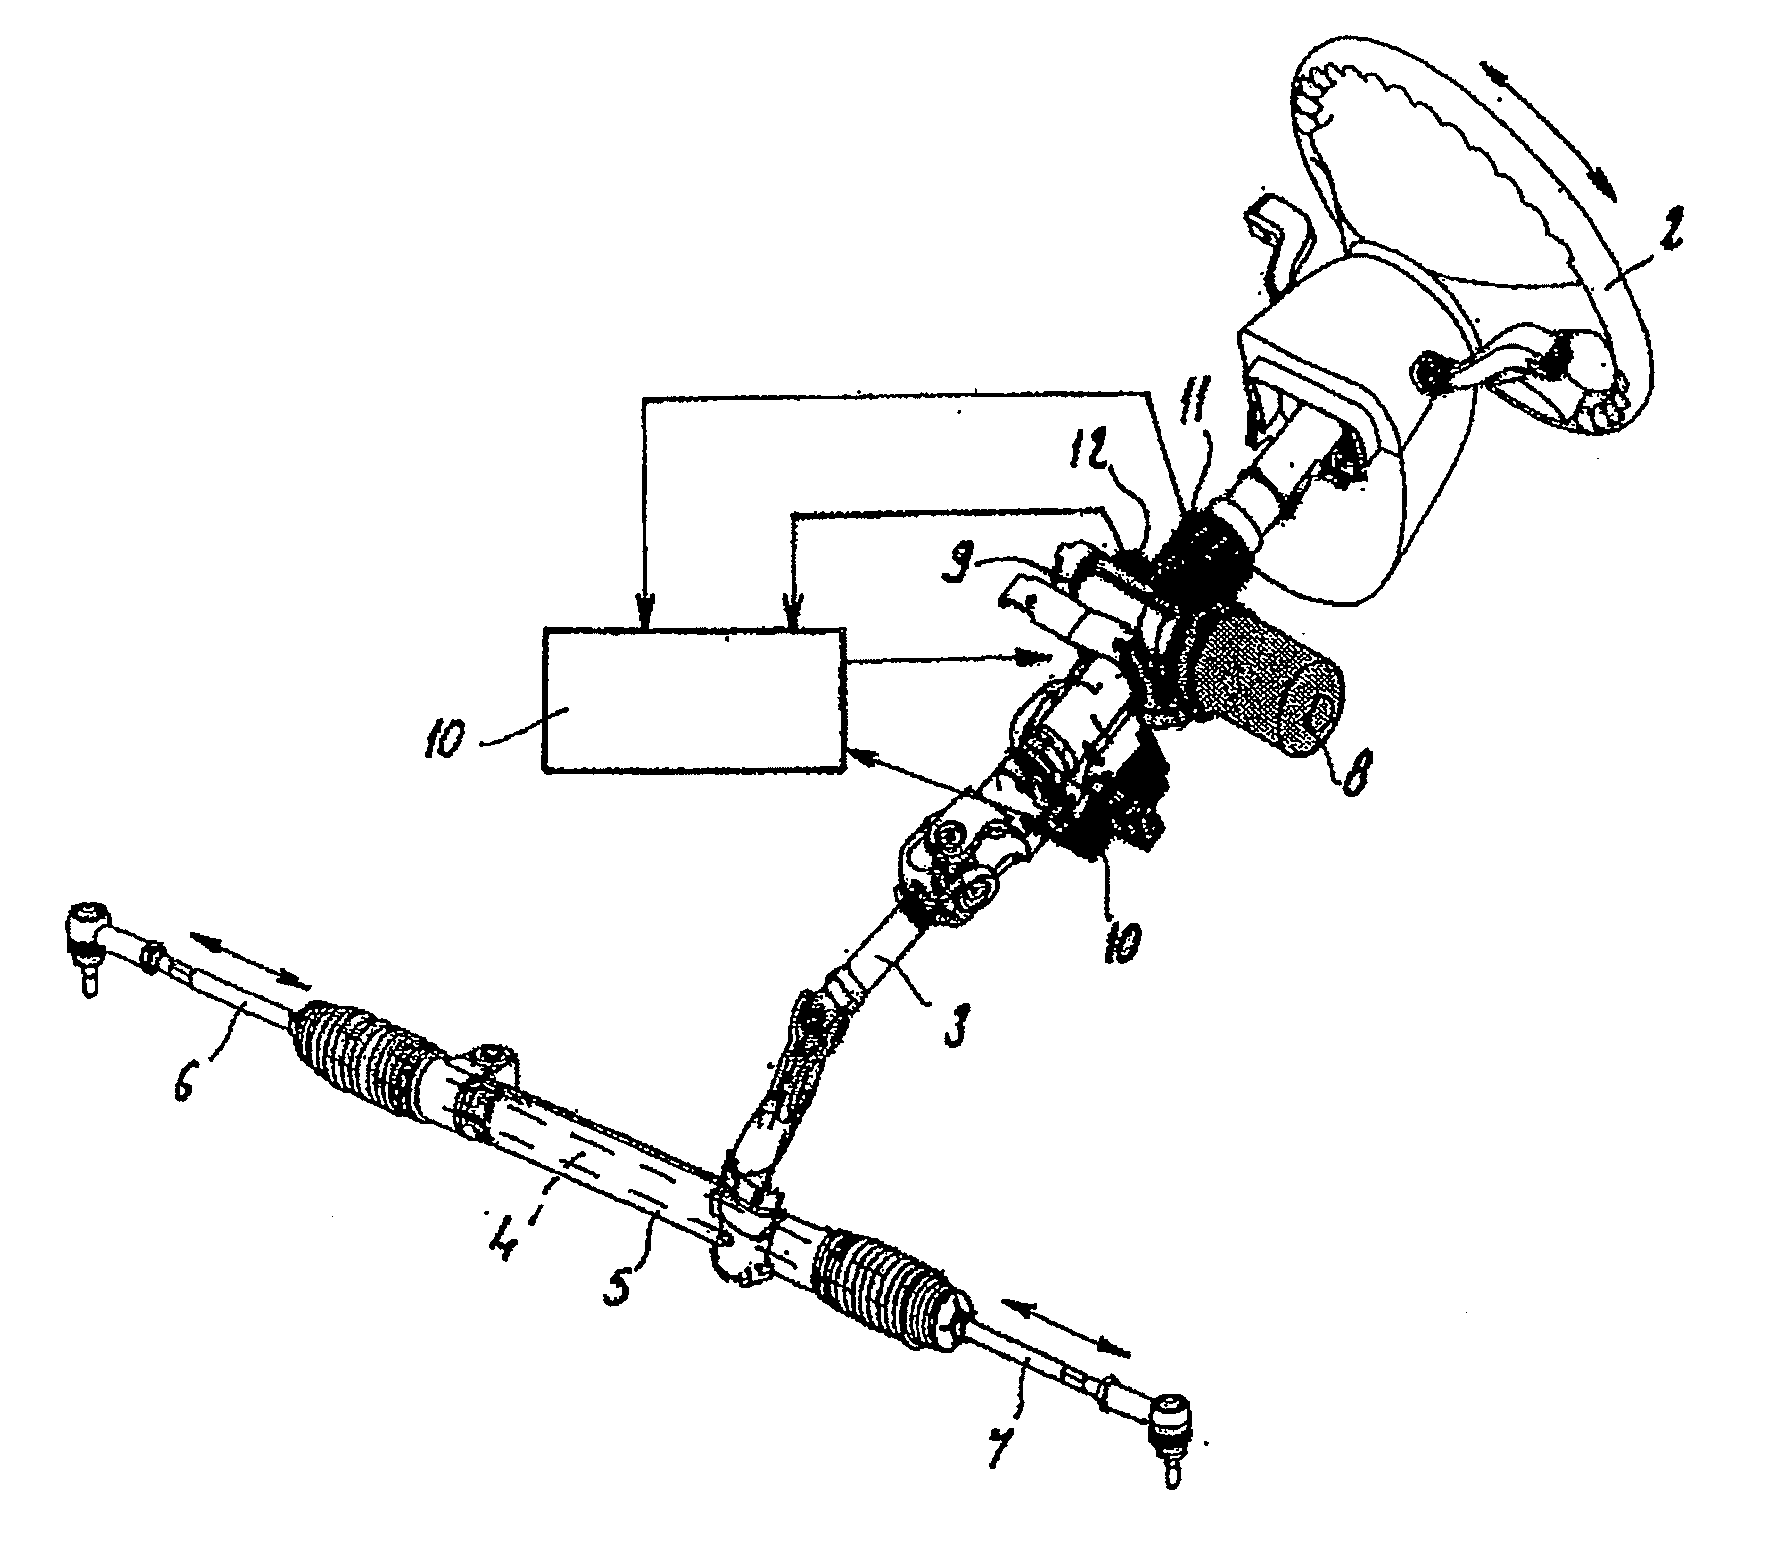 Power assisted steering for an automobile